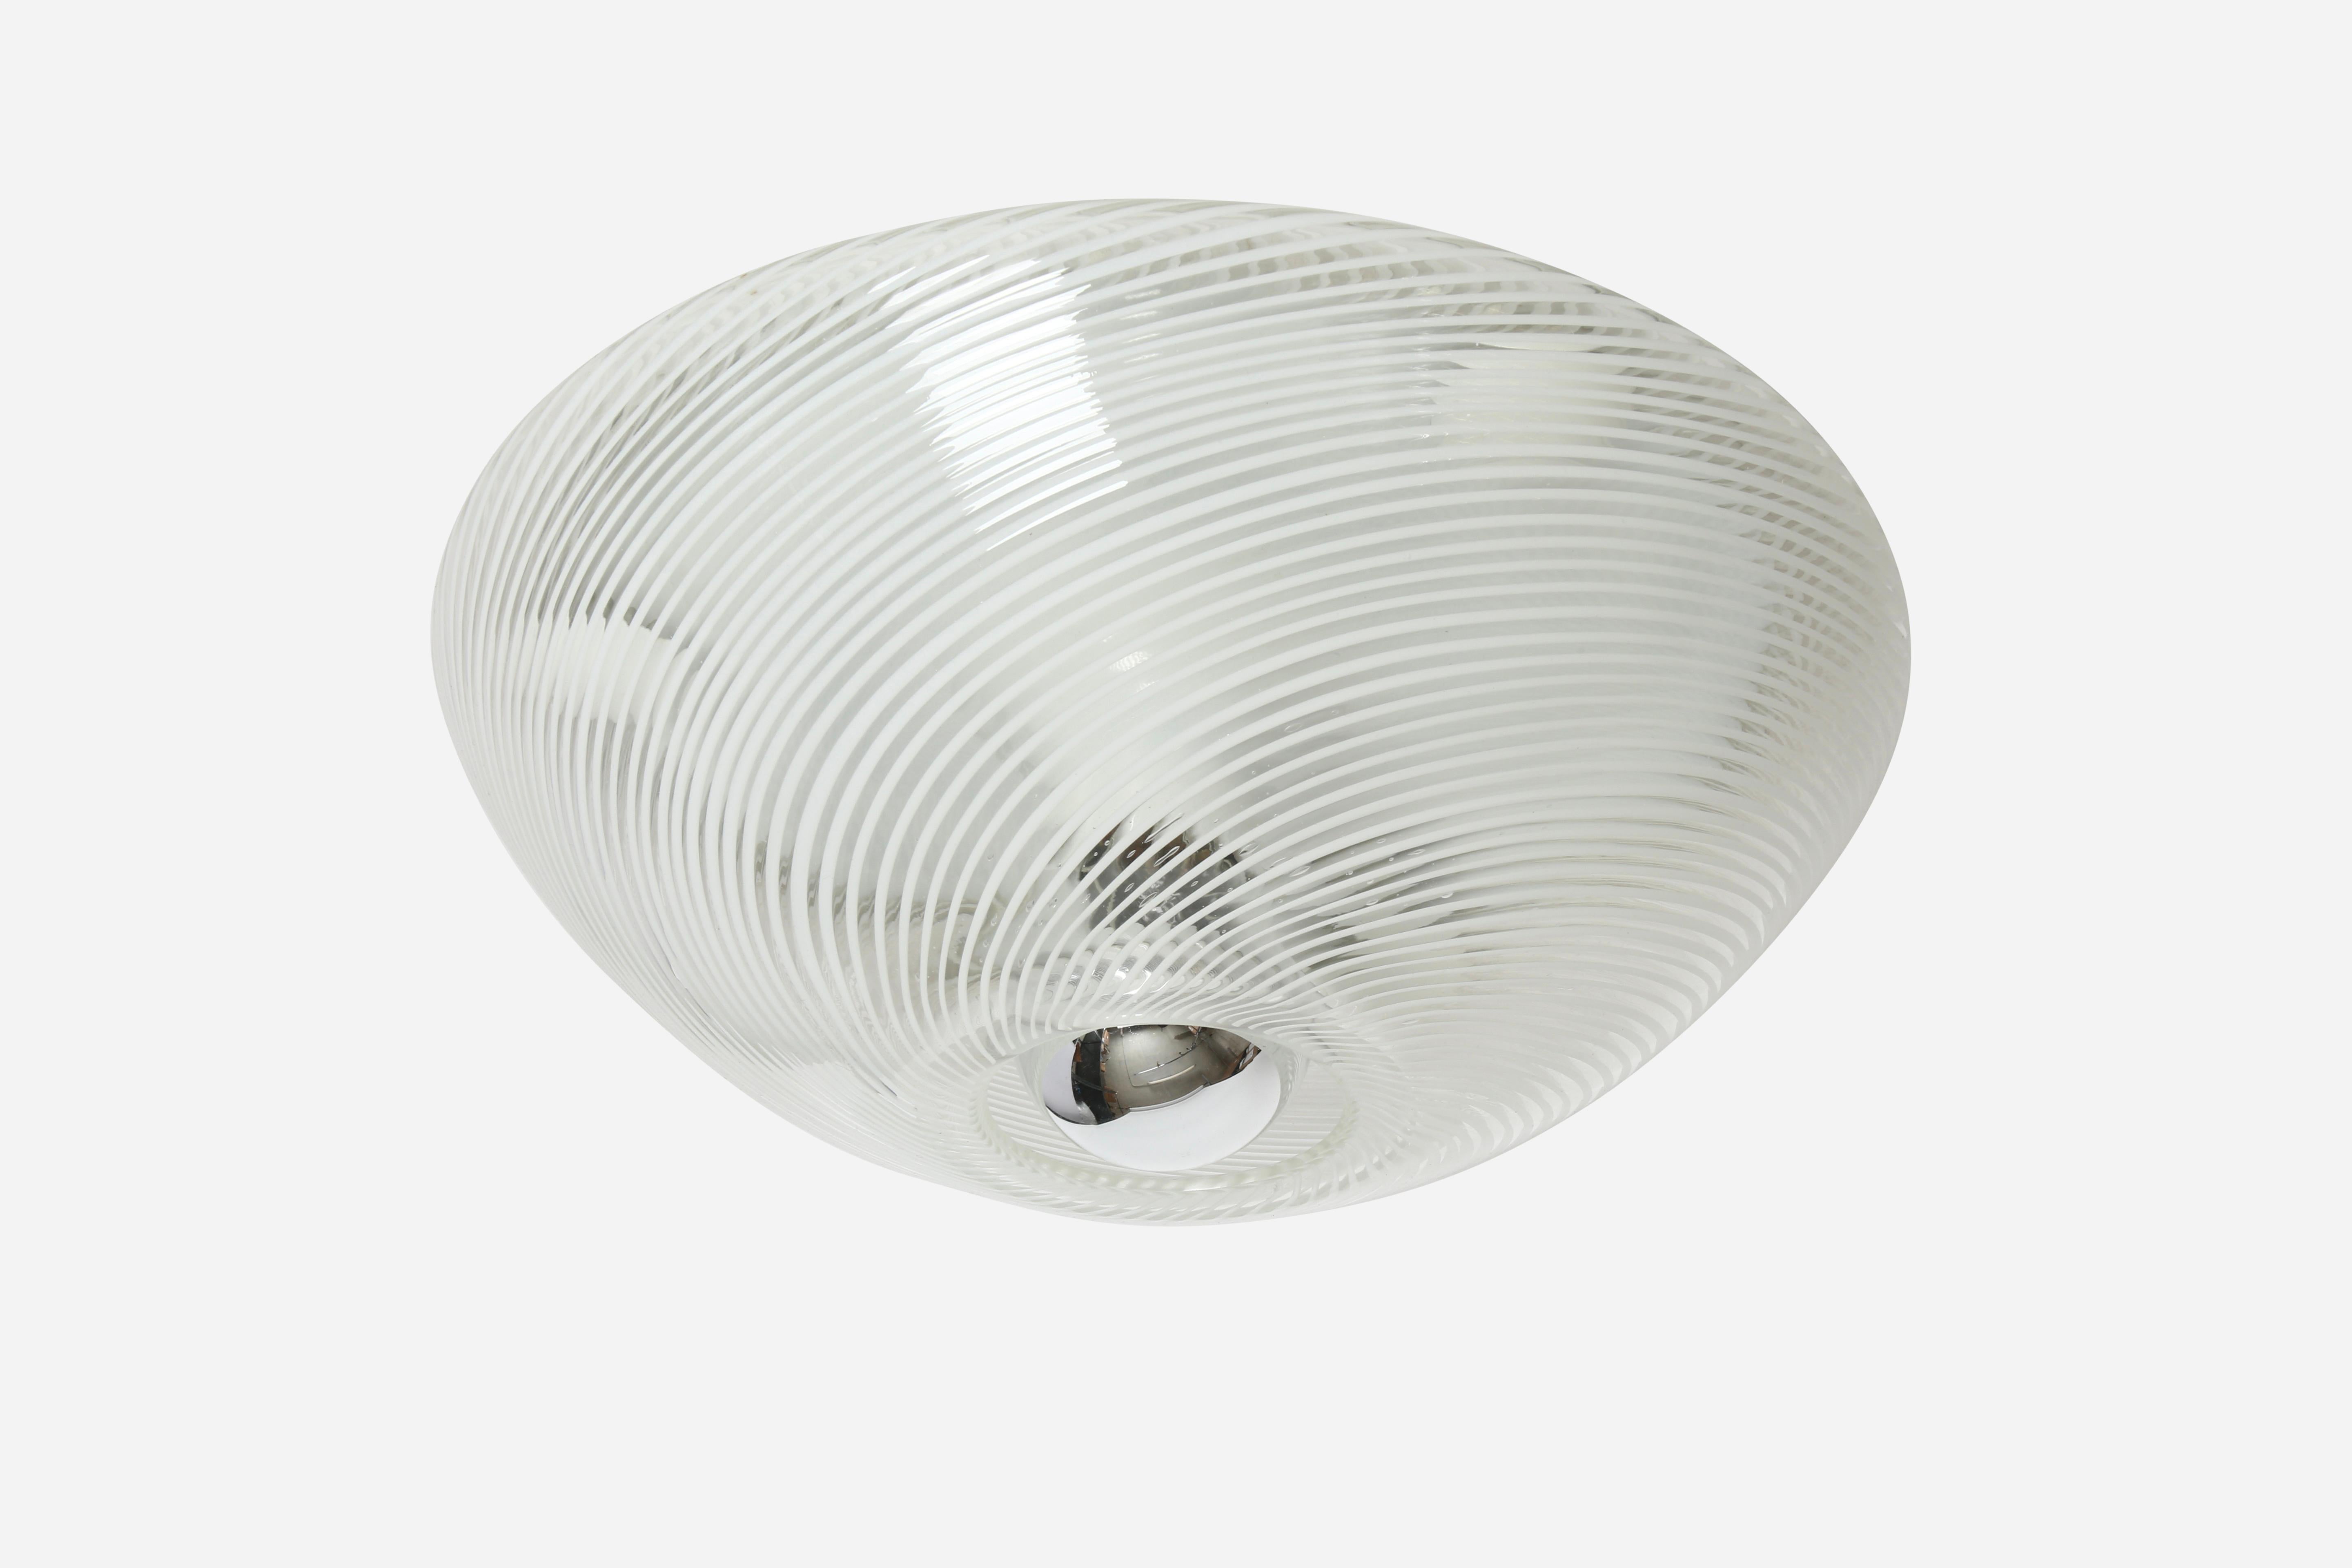 Murano glass flush mount ceiling or wall light.
Made in Italy in 1960s.
Takes one medium base bulb.
Complimentary US rewiring upon request.

We take pride in bringing vintage fixtures to their full glory again.
At Illustris Lighting our main focus